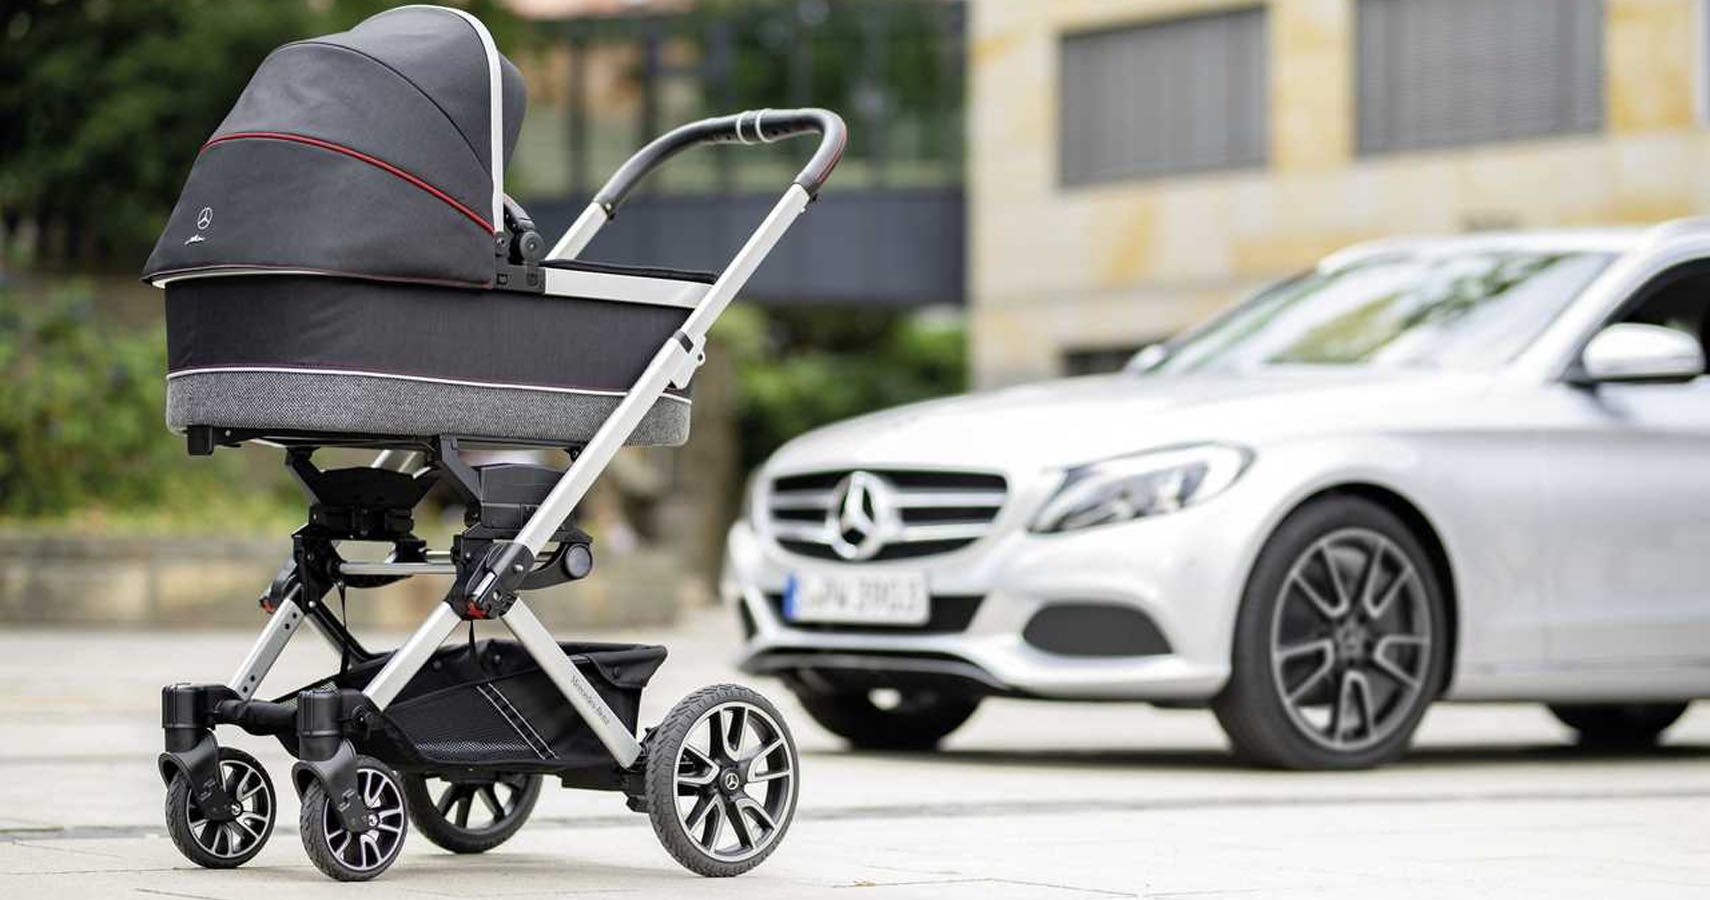 In Movies, Smashing A Baby Carriage Is An Often-Used Car Stunt